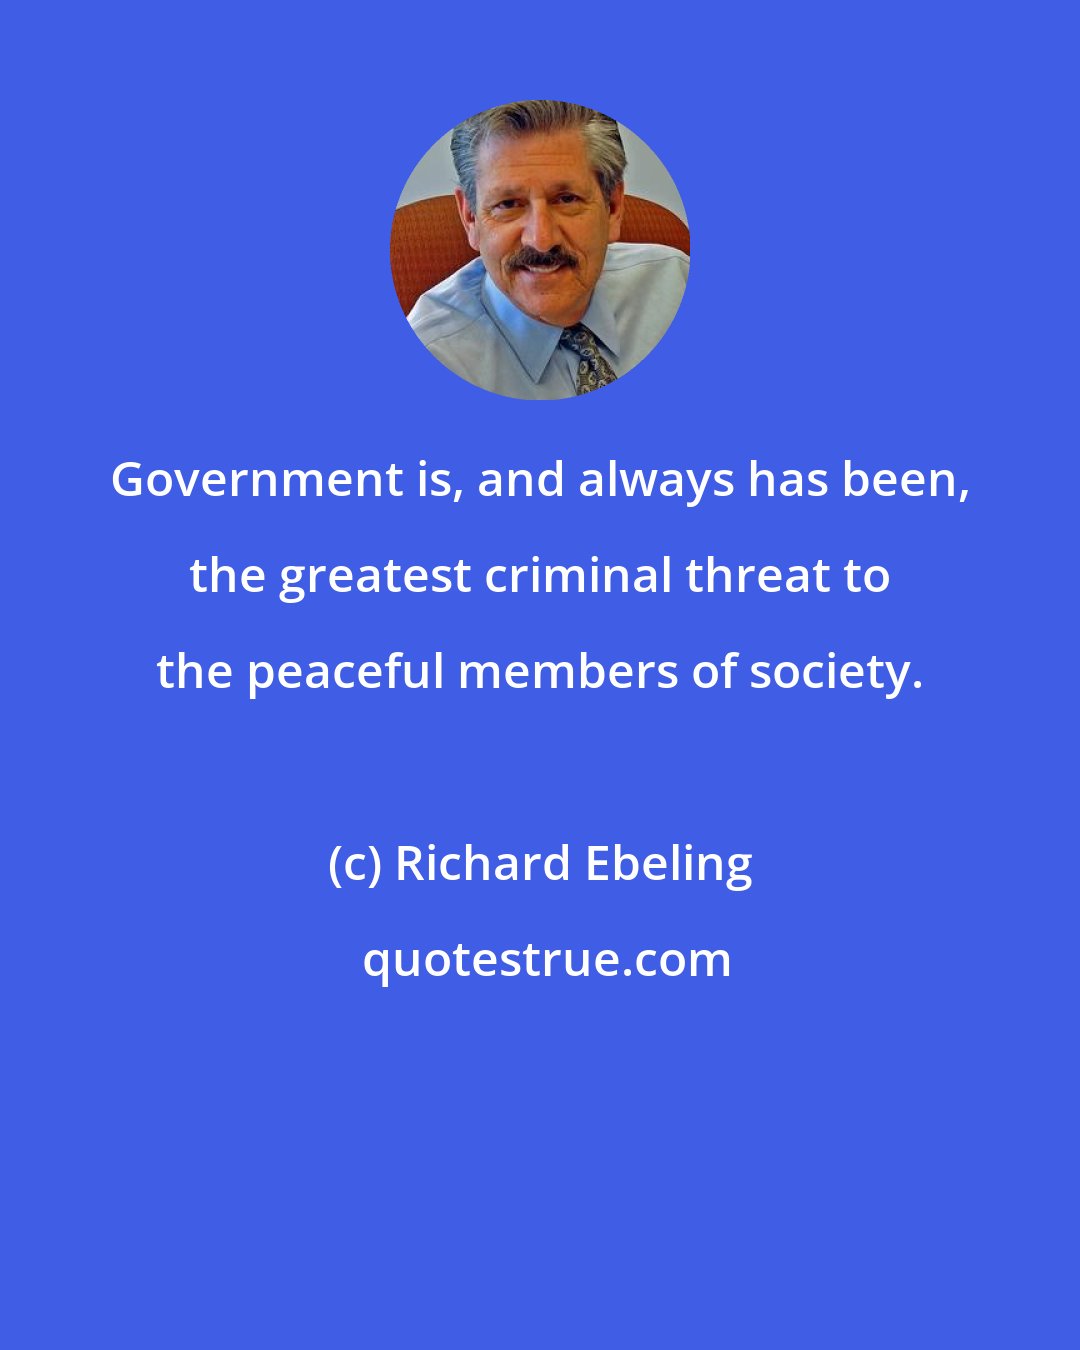 Richard Ebeling: Government is, and always has been, the greatest criminal threat to the peaceful members of society.